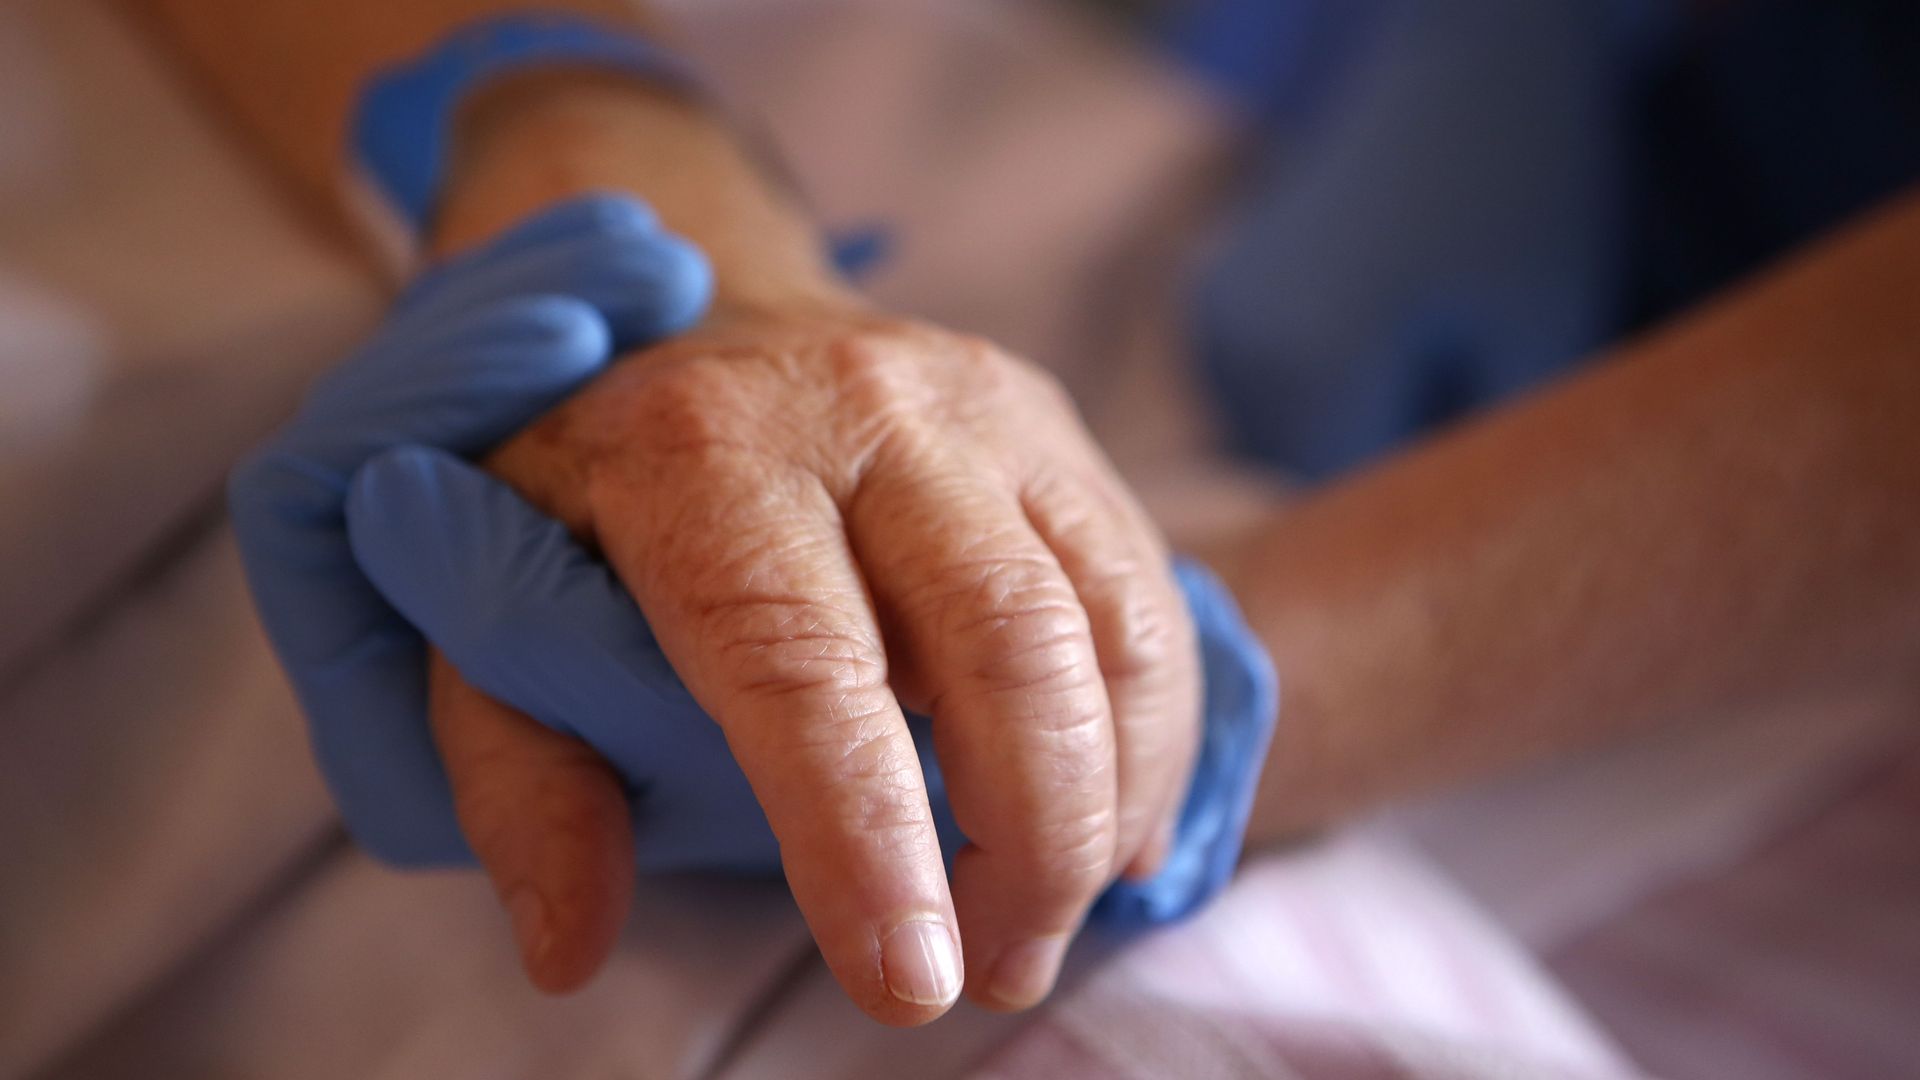 A nurse wearing protective gloves holds the hand of a patient in palliative care.